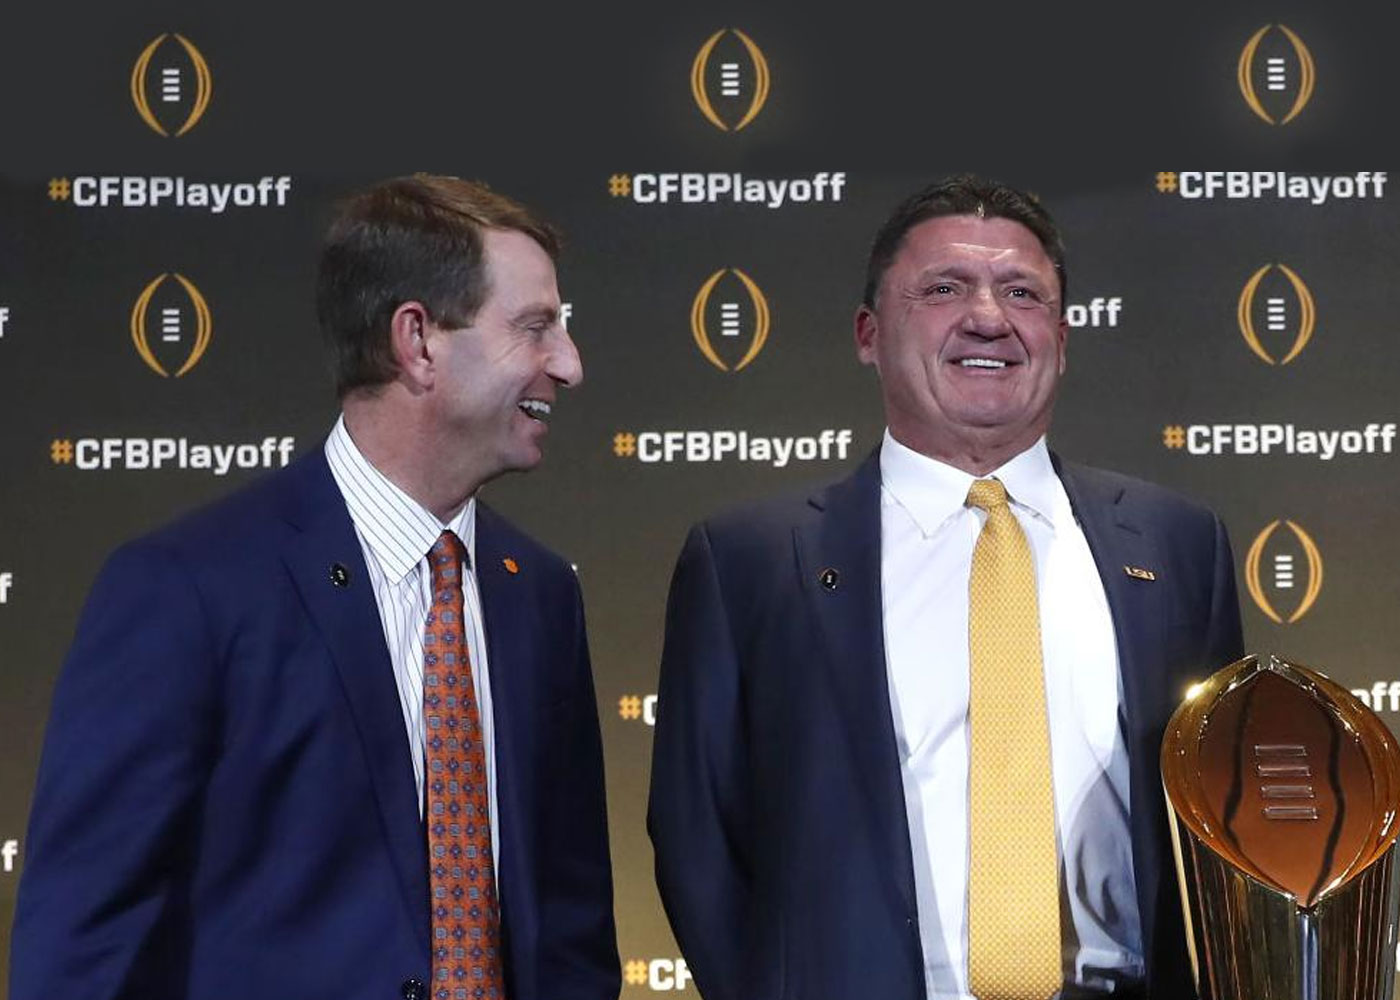 Ed Orgeron left USC but stayed in spirit, and he'd love to return now